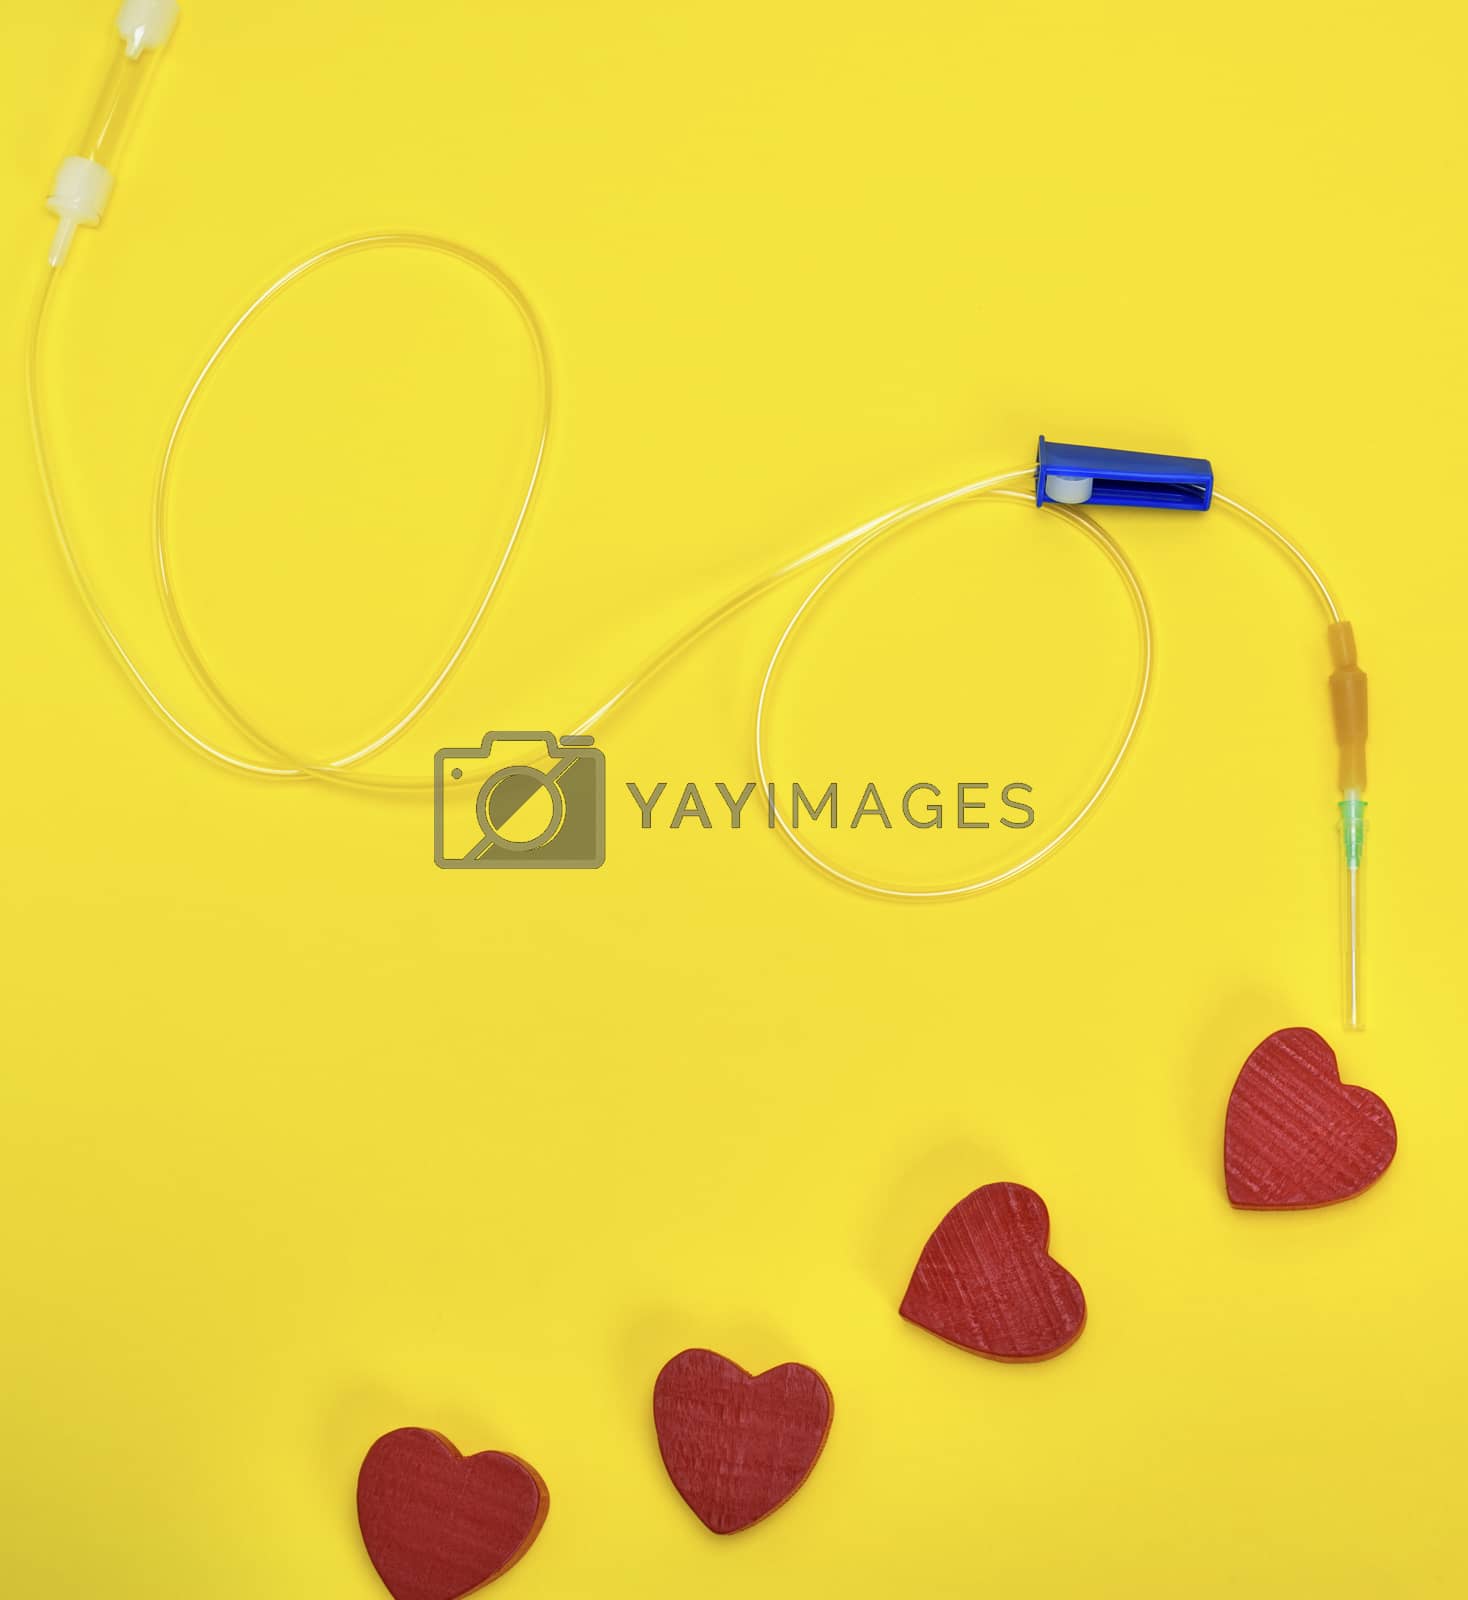 Royalty free image of plastic catheter with needle and red heart  by ndanko